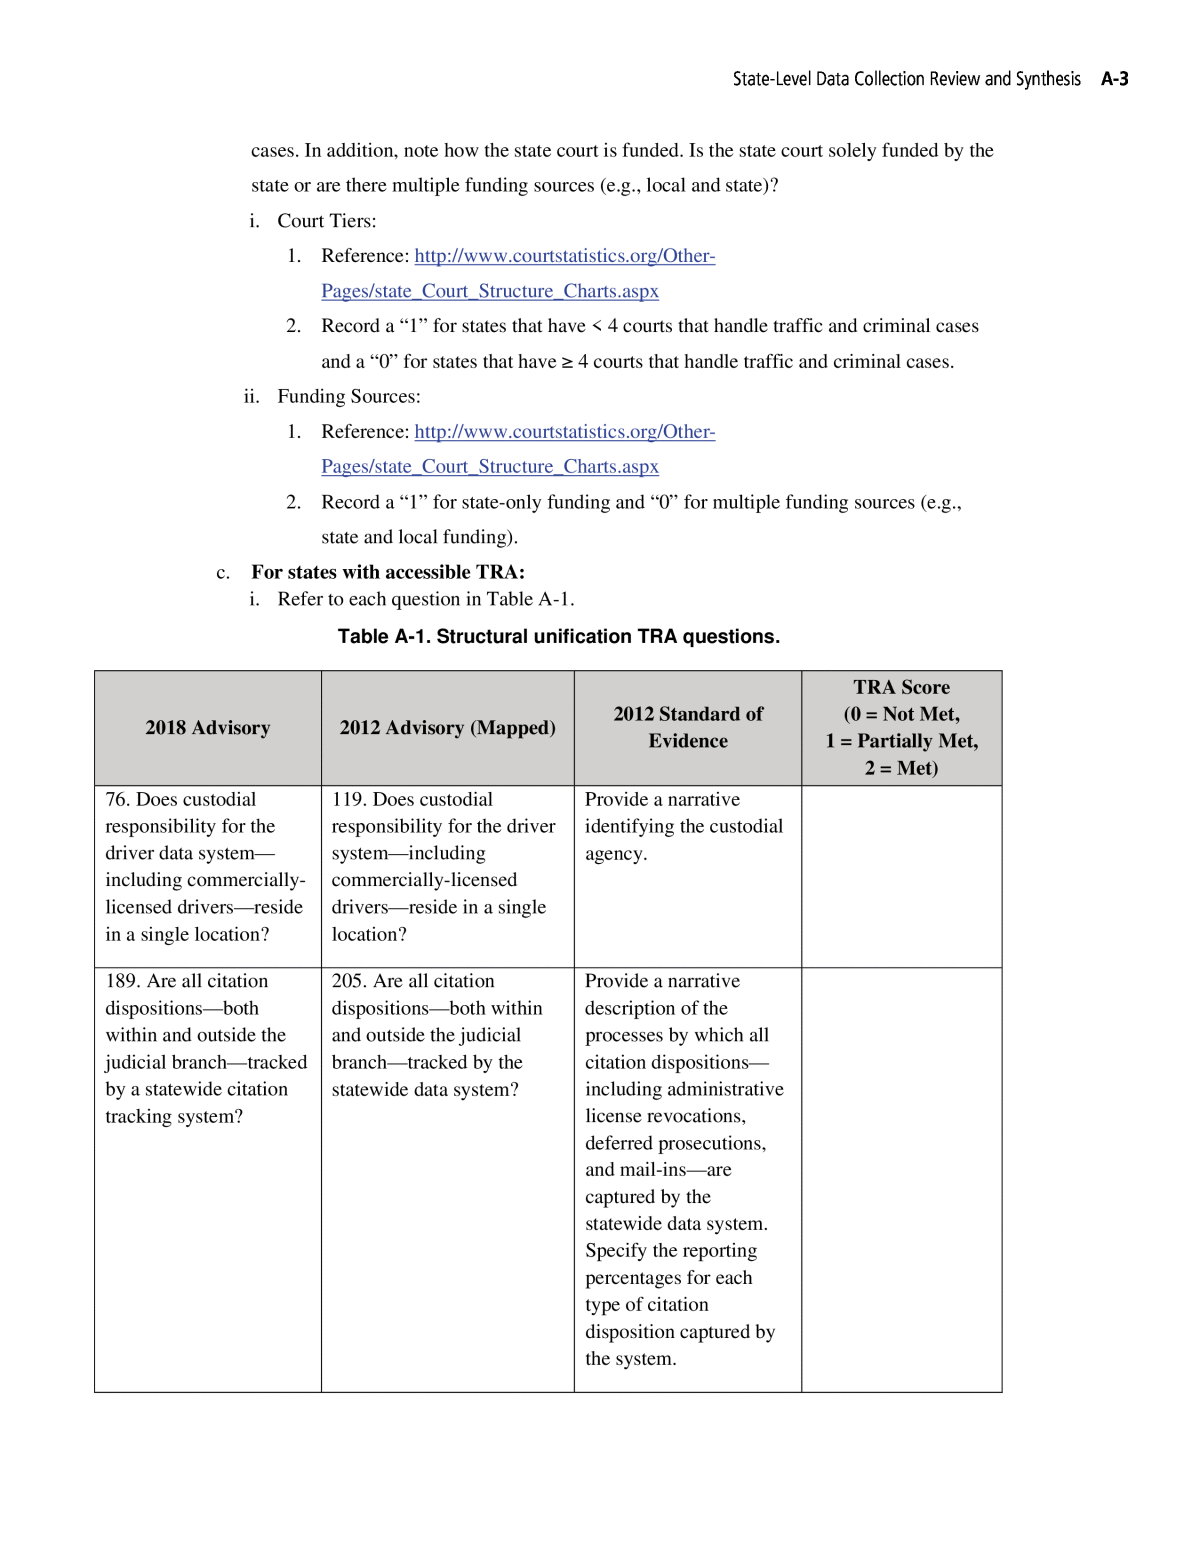 Appendix A - State-Level Data Collection Review and Synthesis 